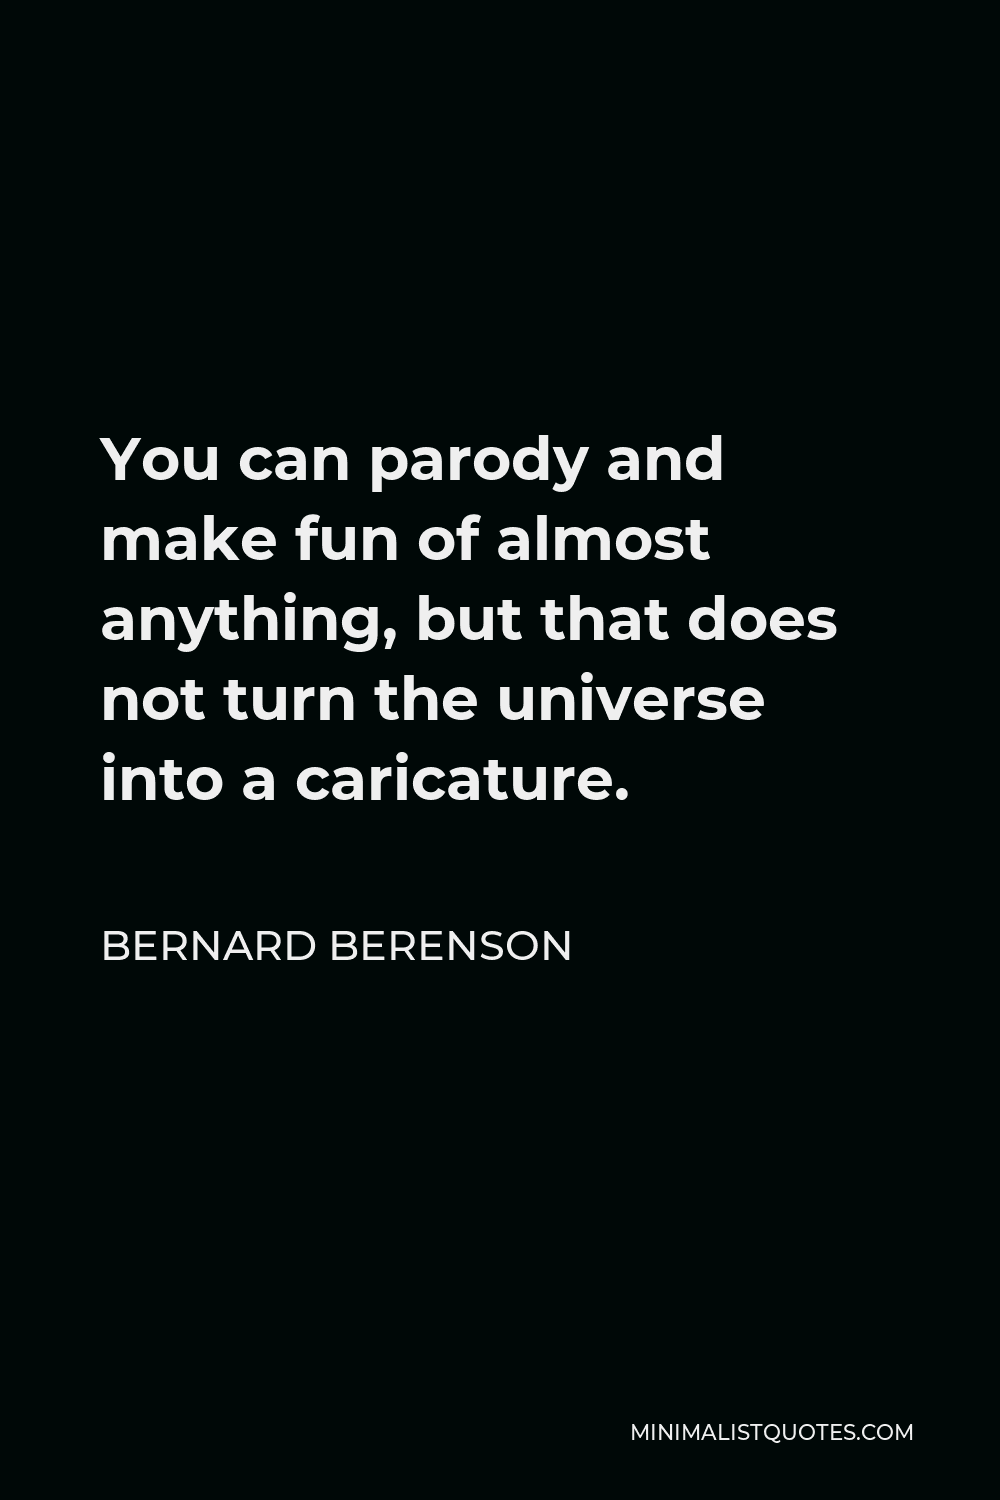 Bernard Berenson Quote - You can parody and make fun of almost anything, but that does not turn the universe into a caricature.